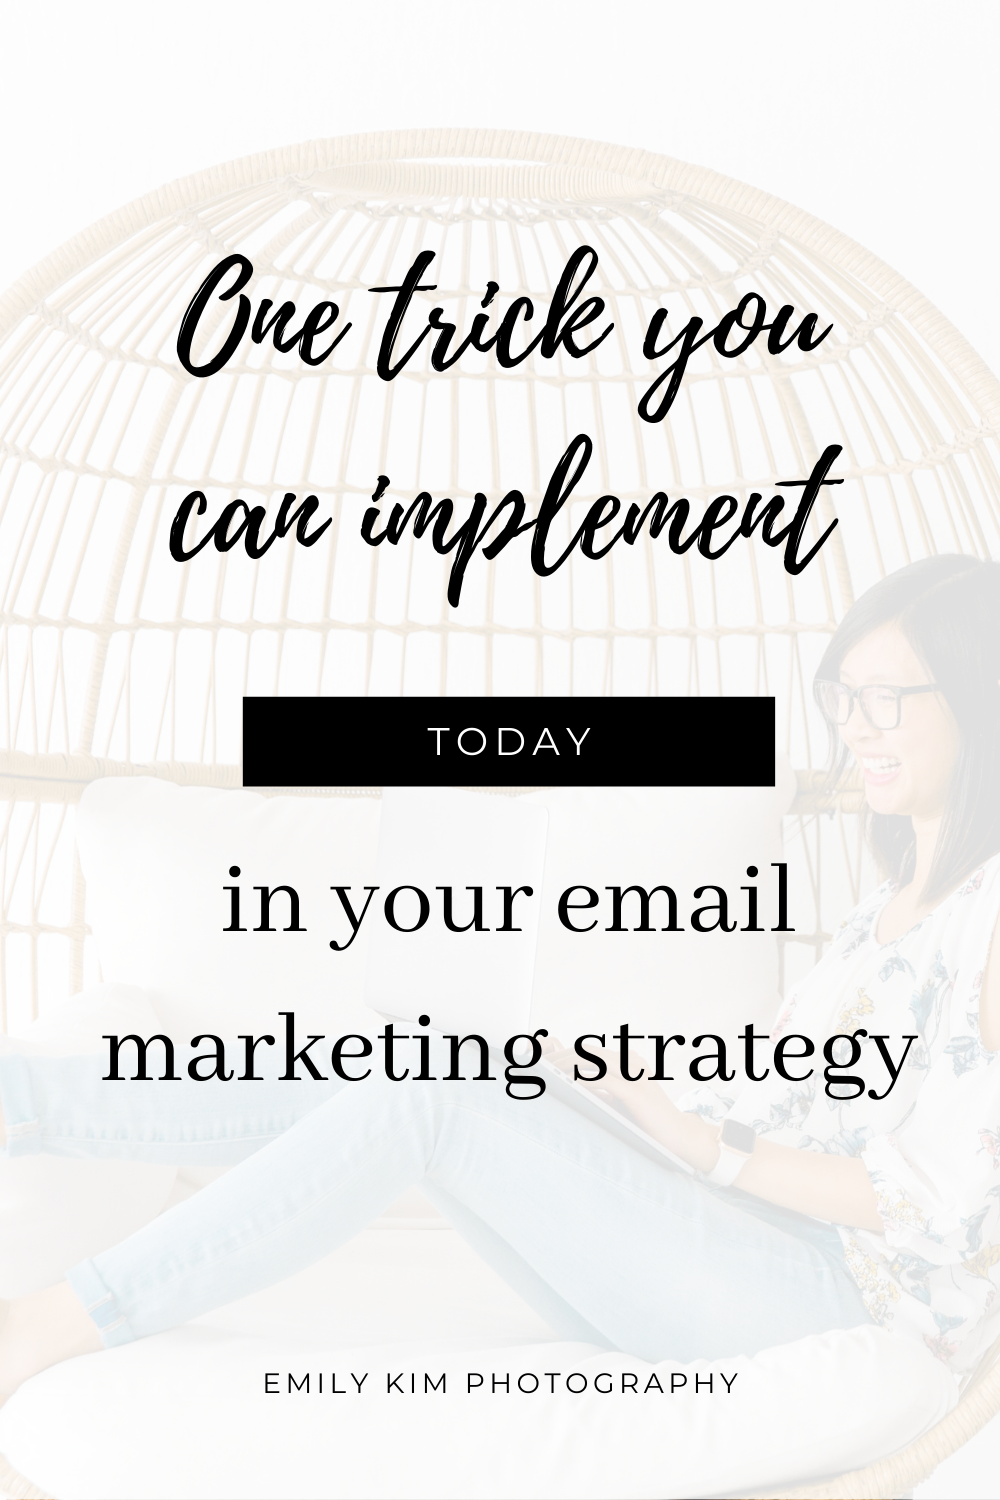 One trick you can implement today in your email marketing strategy